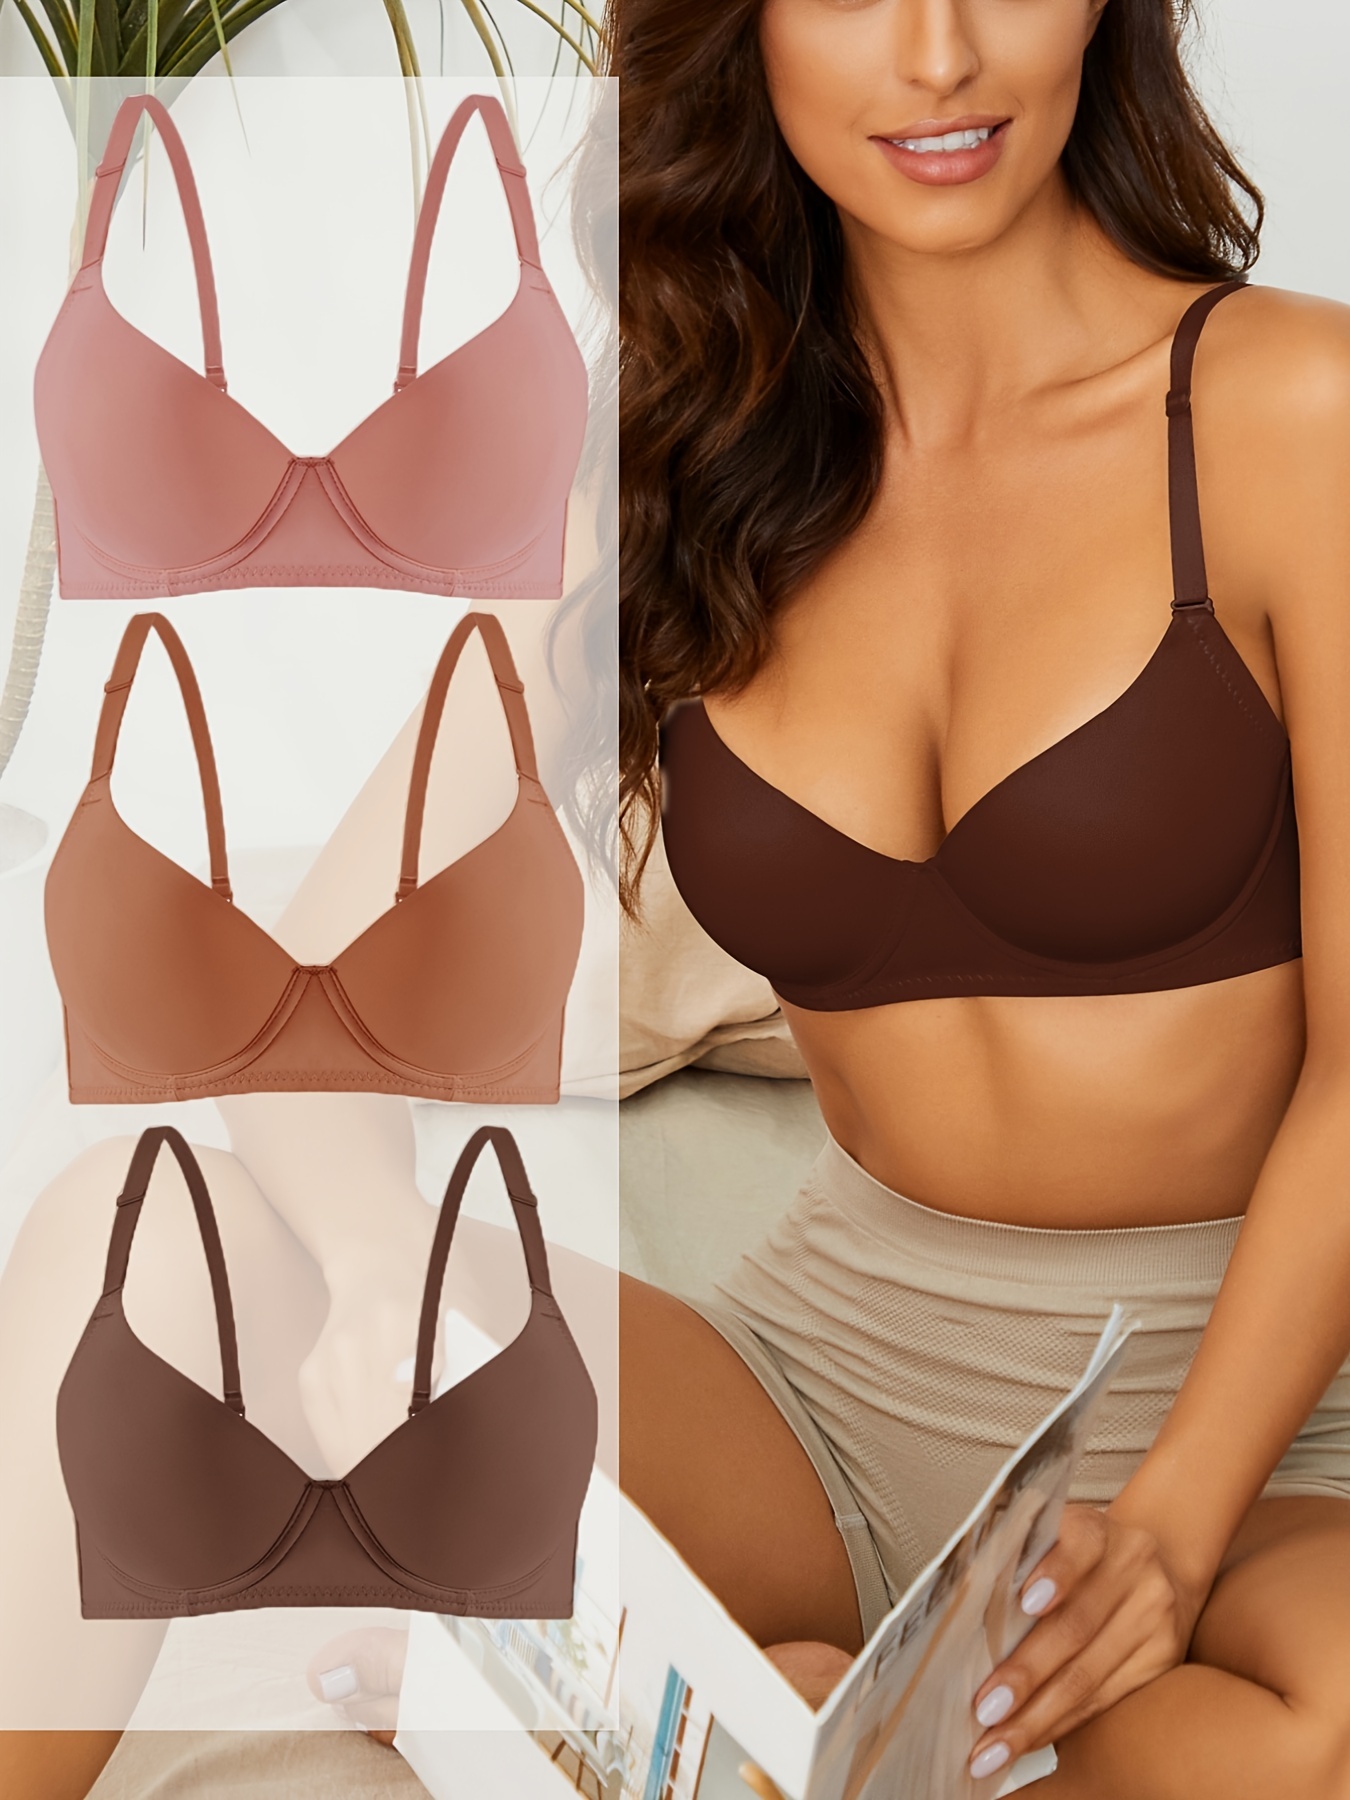 Shop padded bras, pushup bras, underwired bras, non wire bras, strapless  bras, t-shirt bras, Demi Cup bras and Sport Bra bras online from a leading  brands like …